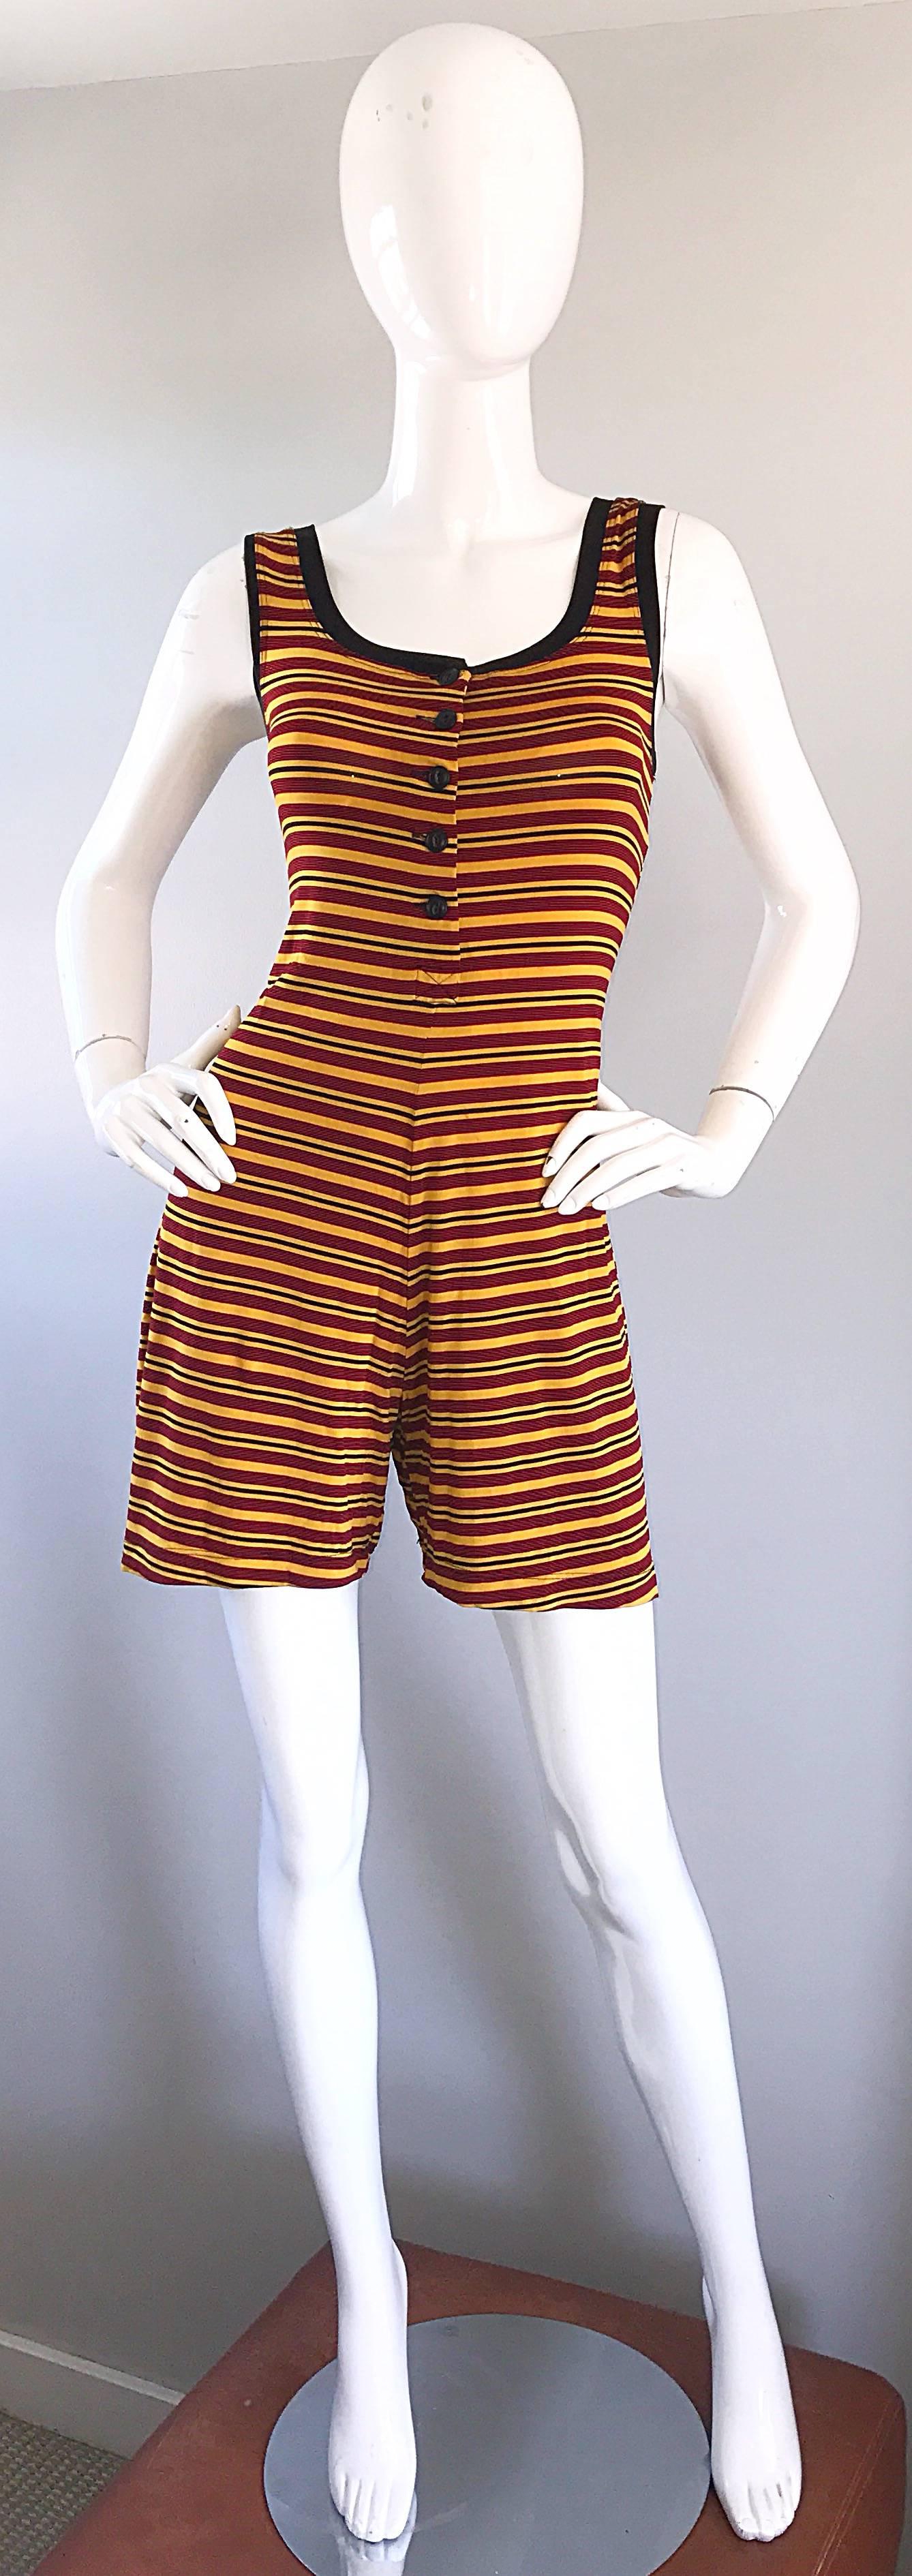 Vintage Betsey Johnson 1920s Inspired 1990s Yellow and Maroon Striped 90s Romper For Sale 2